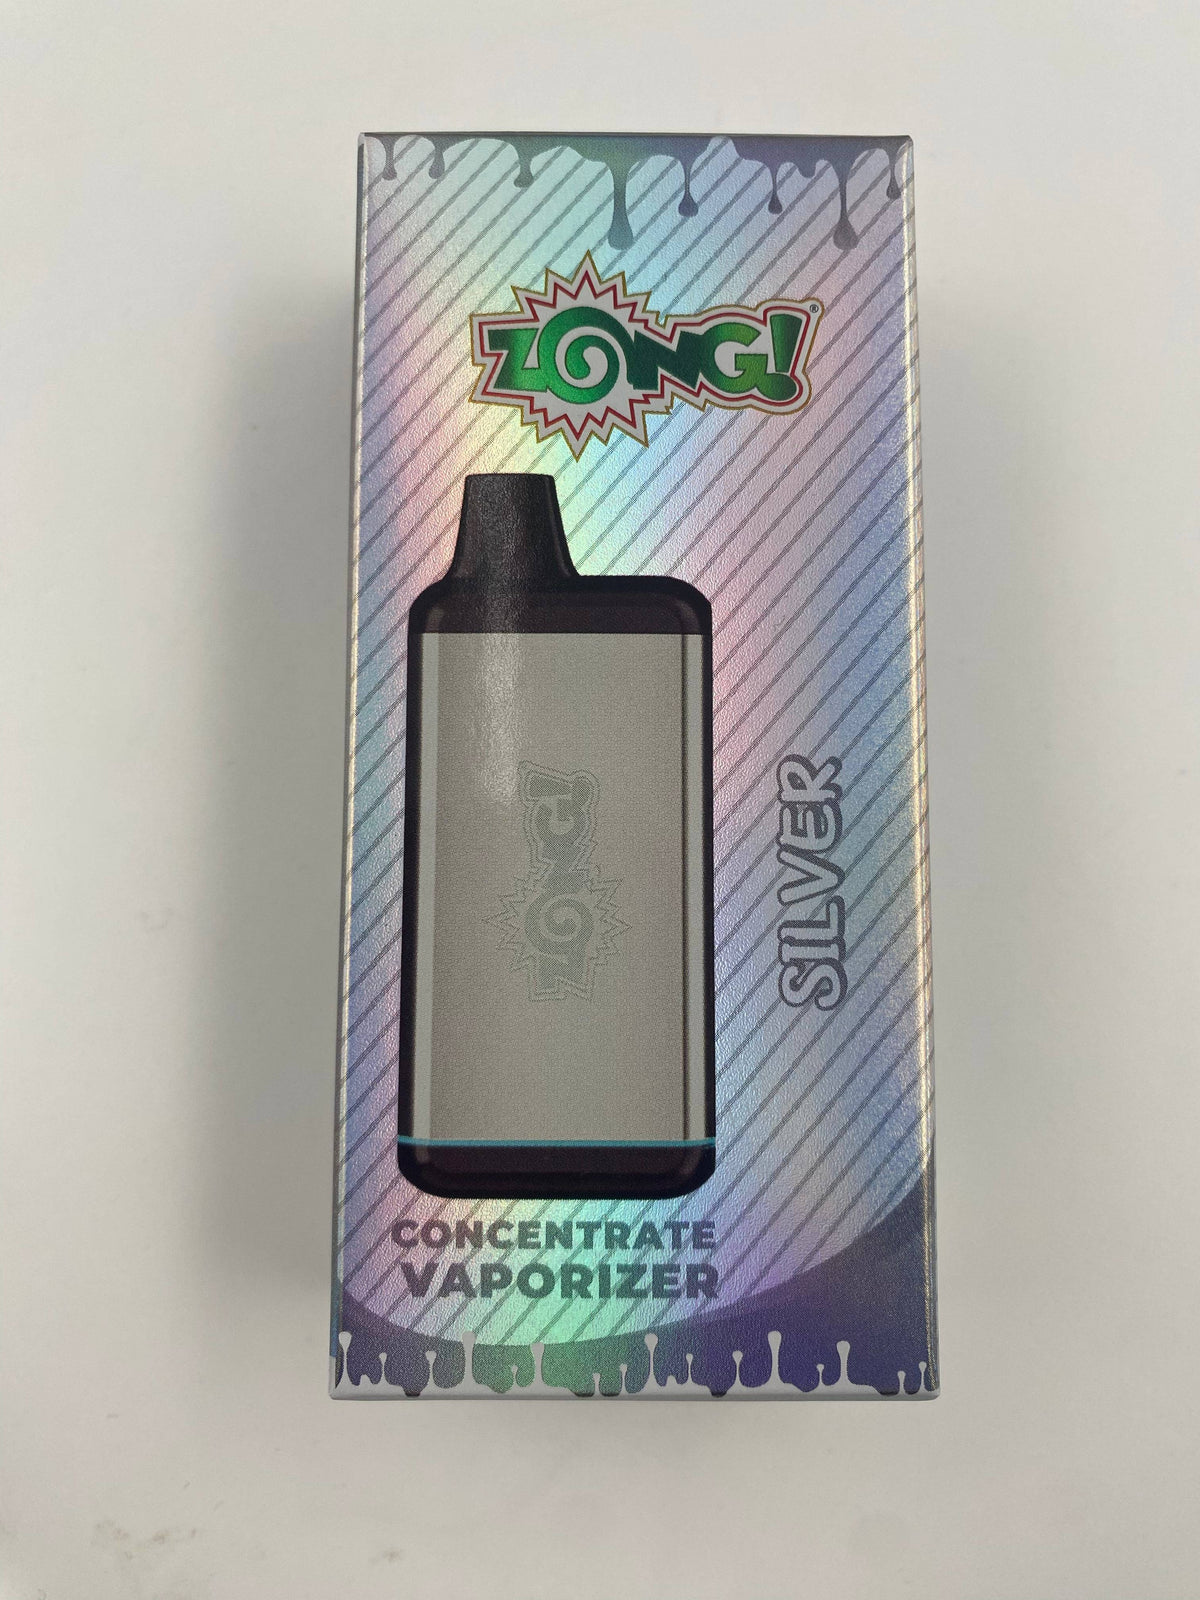 ZONG CONCENTRATE BATTERY SILVER 5 CT DISPLAY